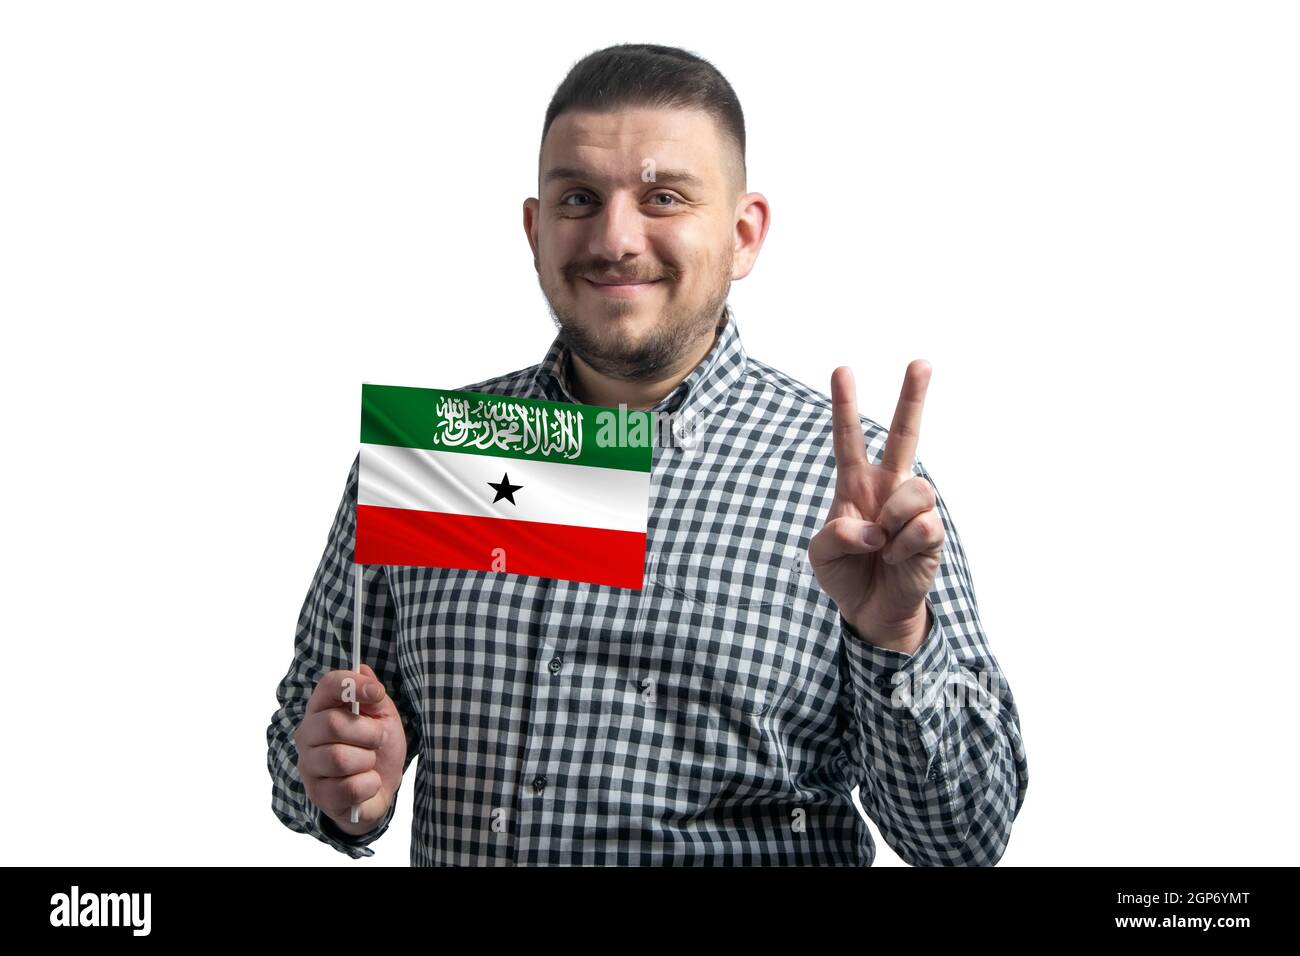 White guy holding a flag of Somaliland and shows two fingers isolated on a white background. Stock Photo